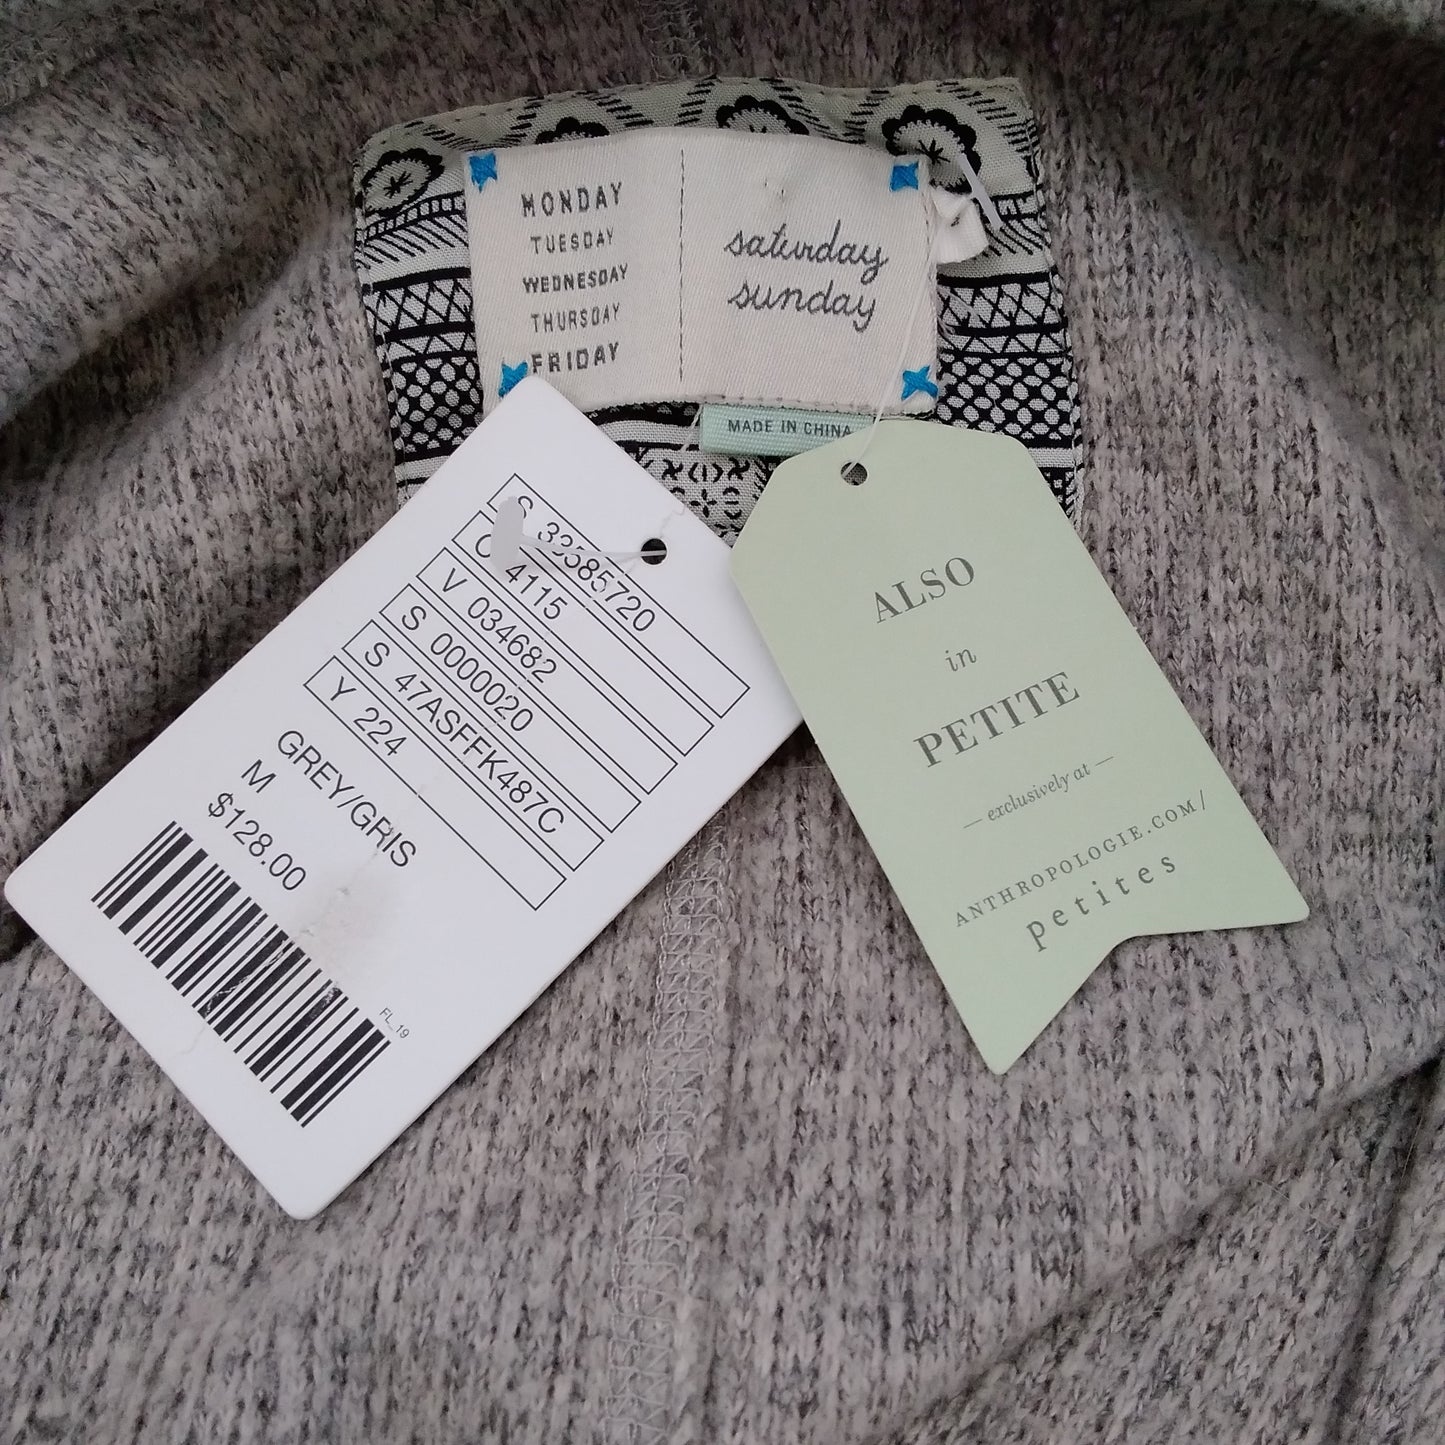 Saturday Sunday Anthropologie Gray Whimbrel Cape Poncho/Sweater - NWT - Size M